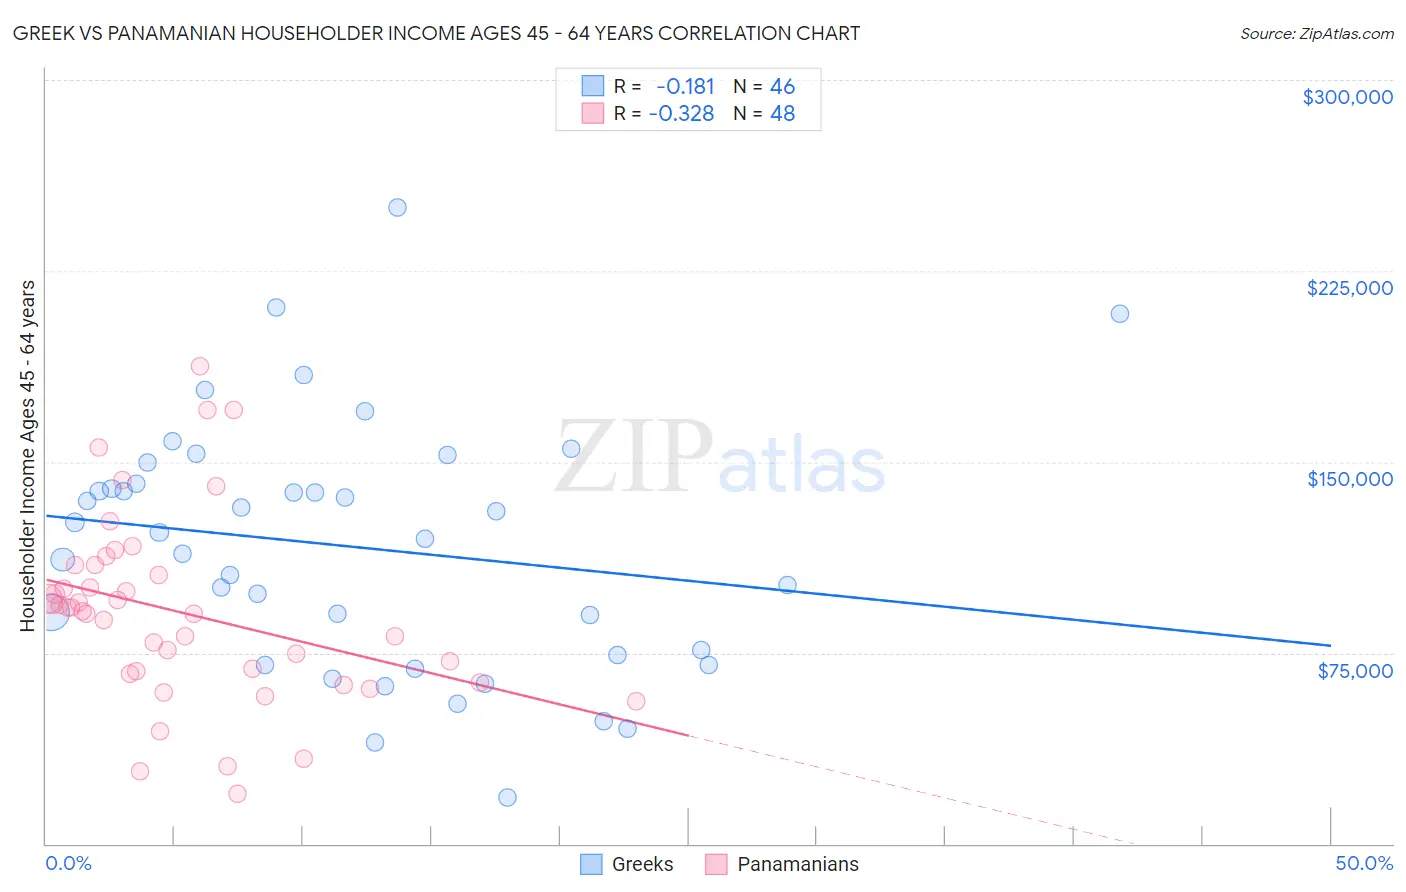 Greek vs Panamanian Householder Income Ages 45 - 64 years